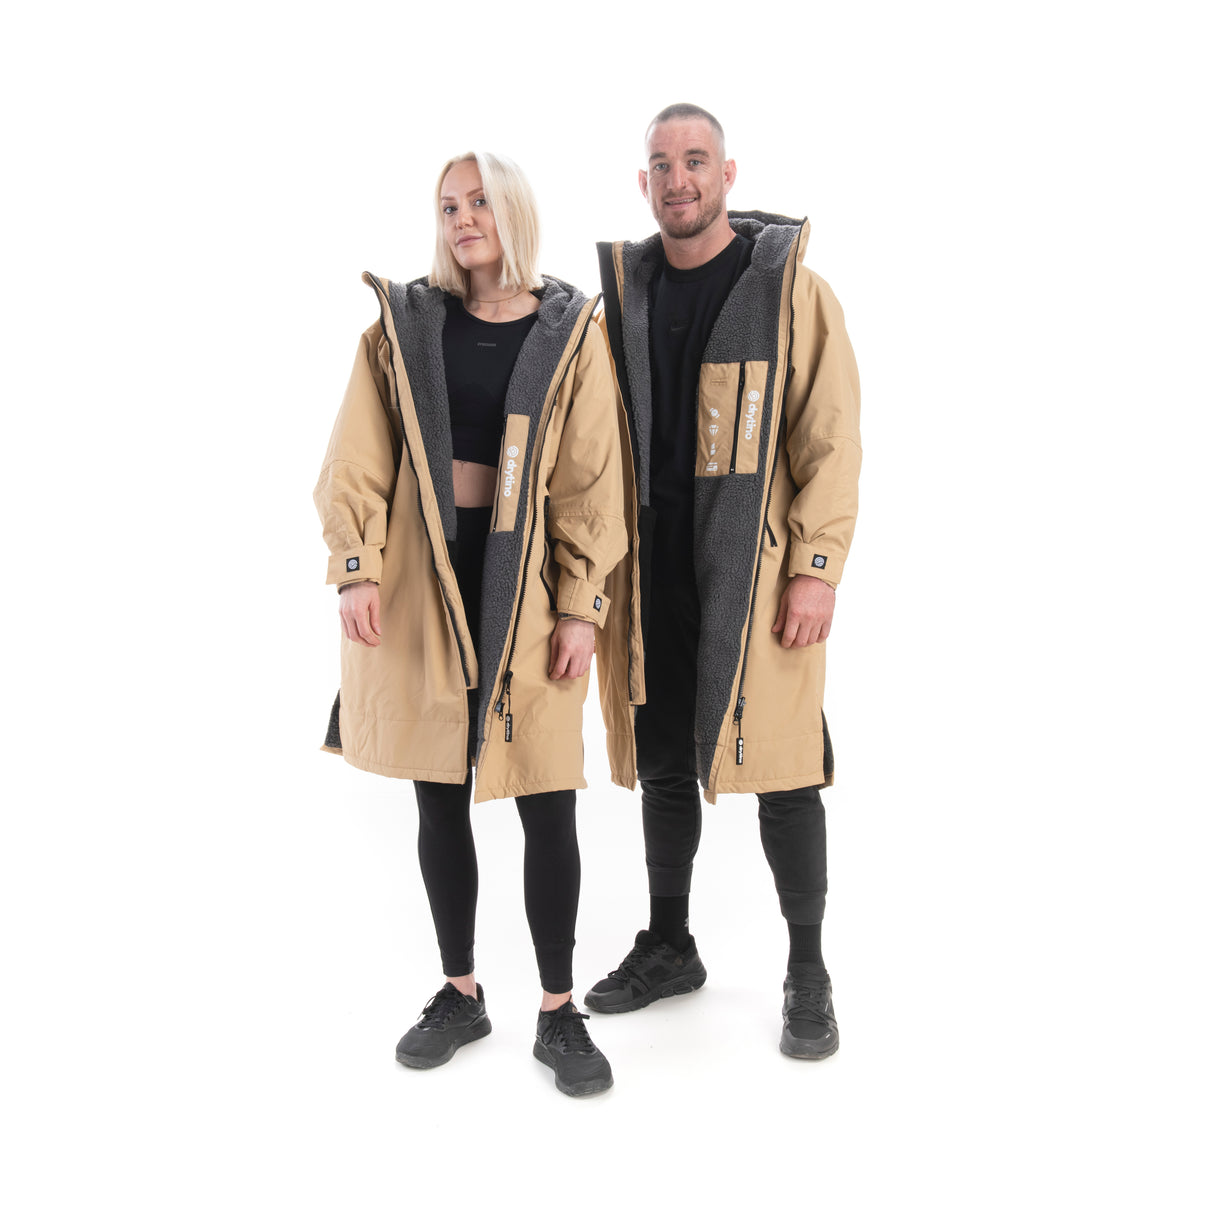 DryTino Beige Shell with Grey Lining - Long Sleeved Robe